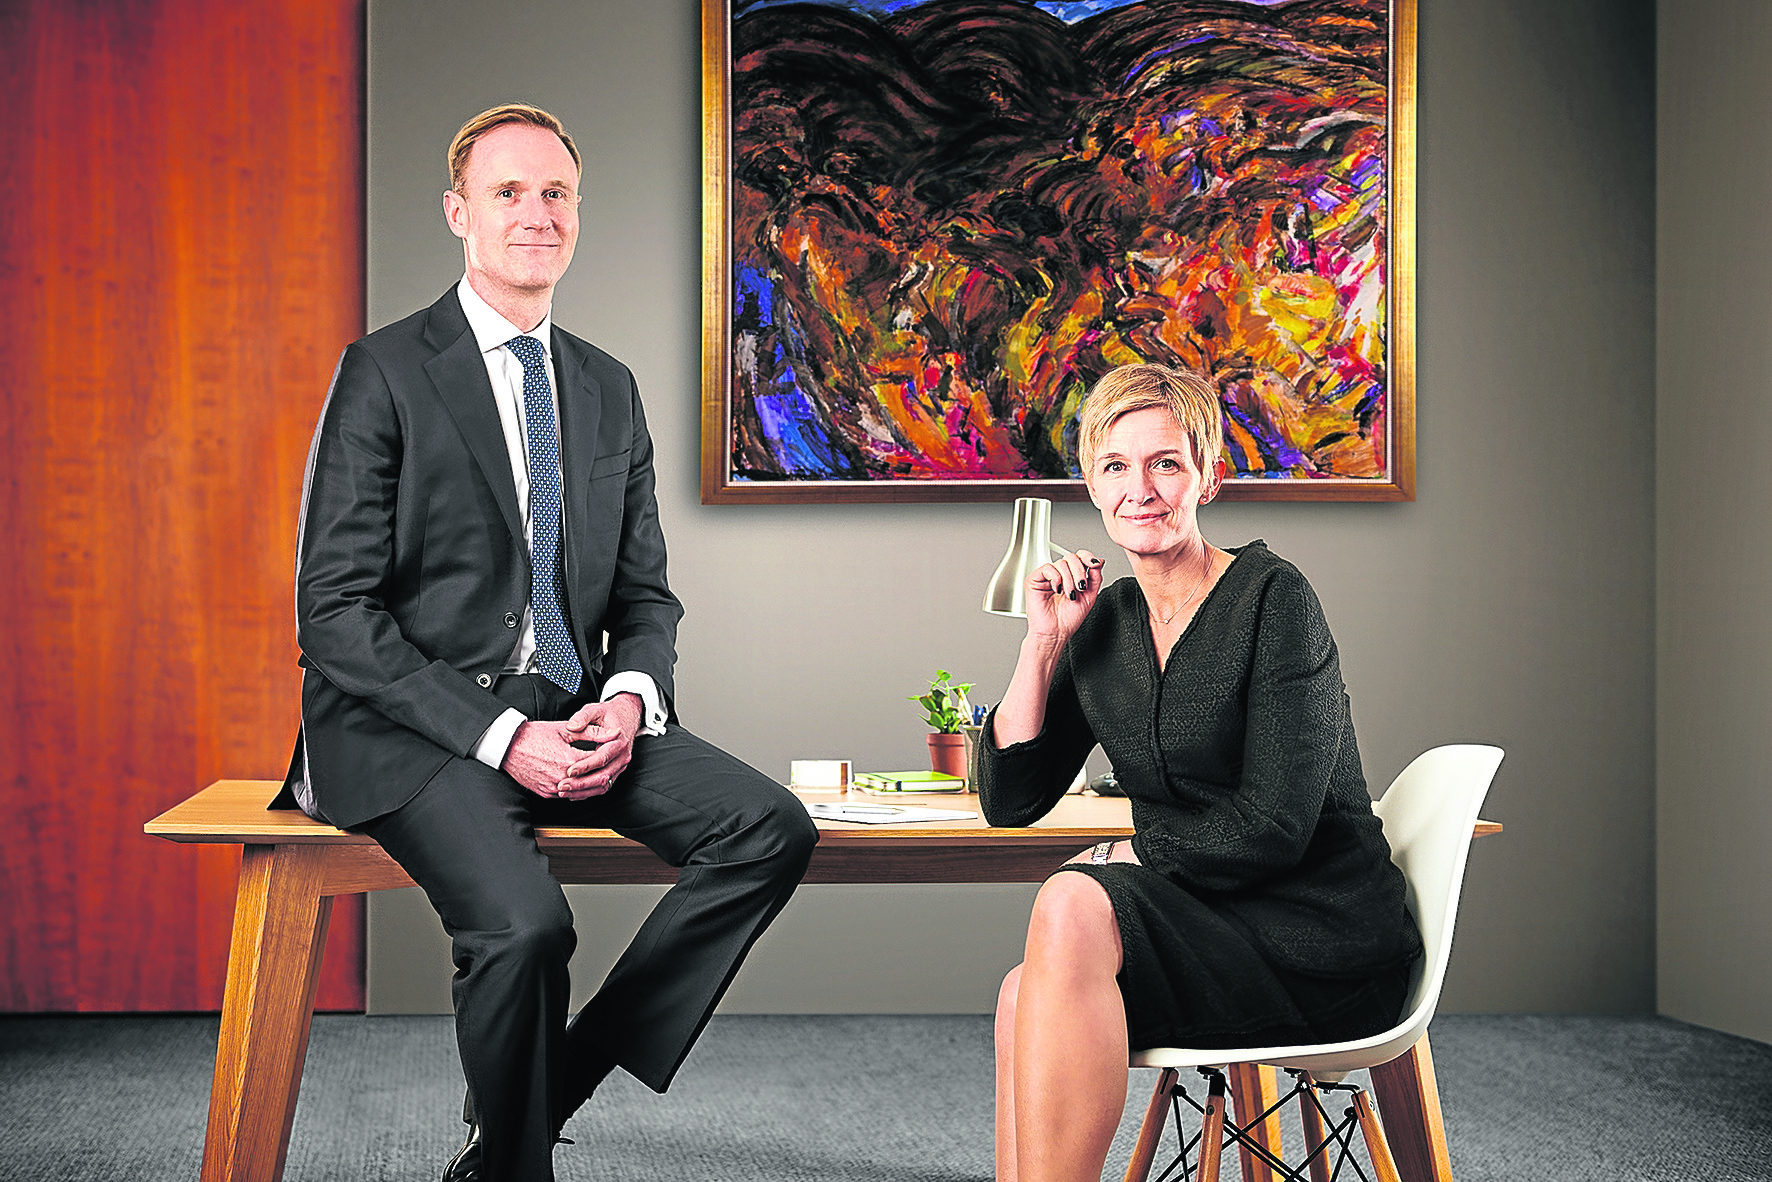 Peter Lawson will take over as chairman at Burness Paull while Tamar Tammes will step into the role of managing partner in August.